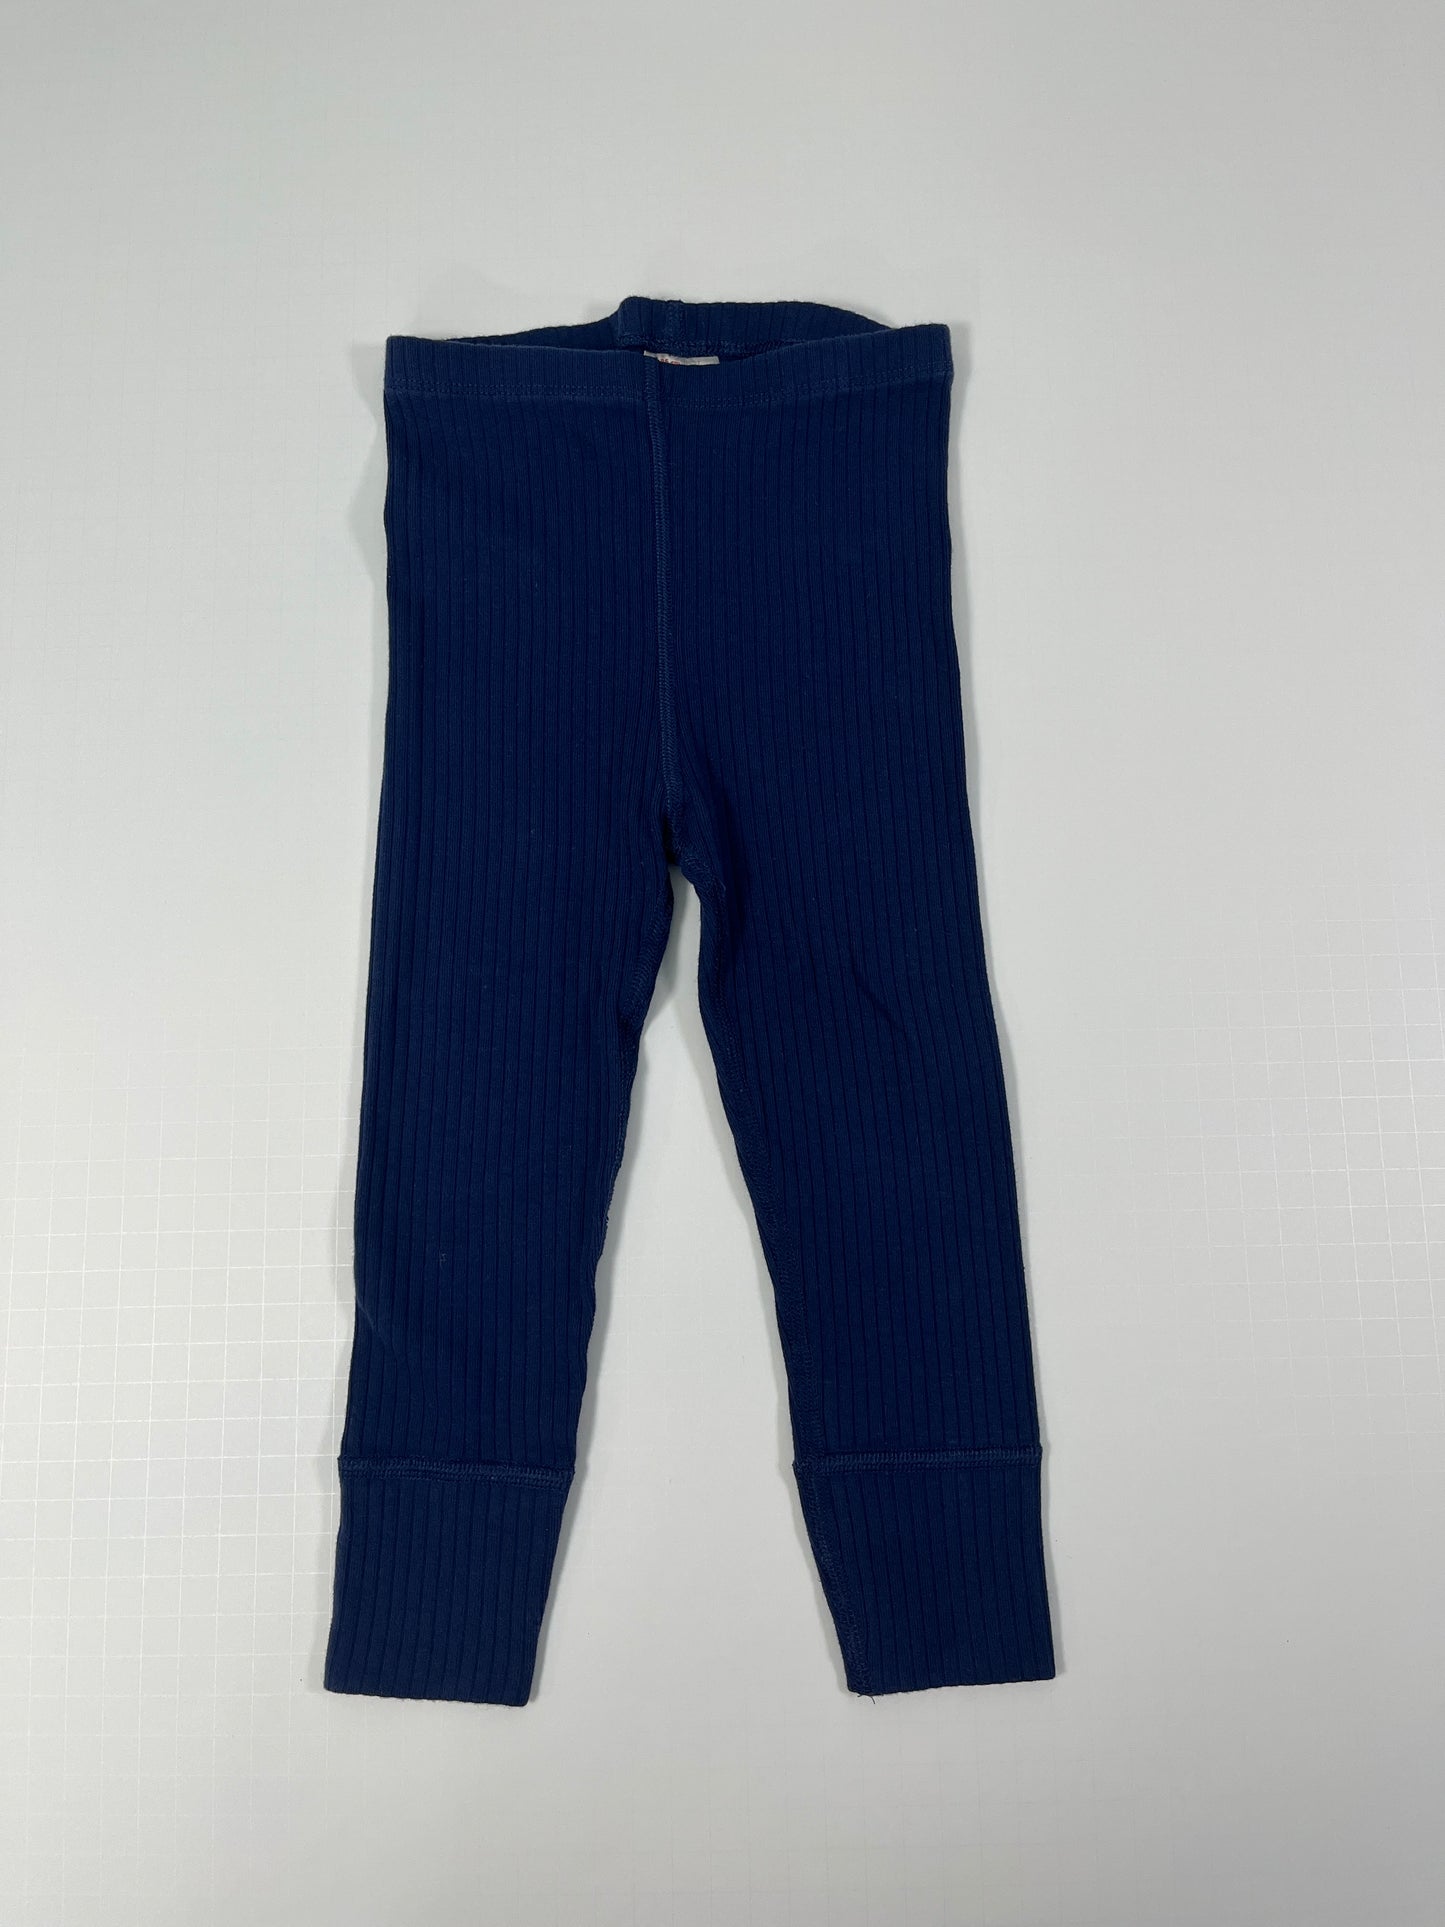 PPU 45242 2T girls Hanna Andersson navy ribbed leggings